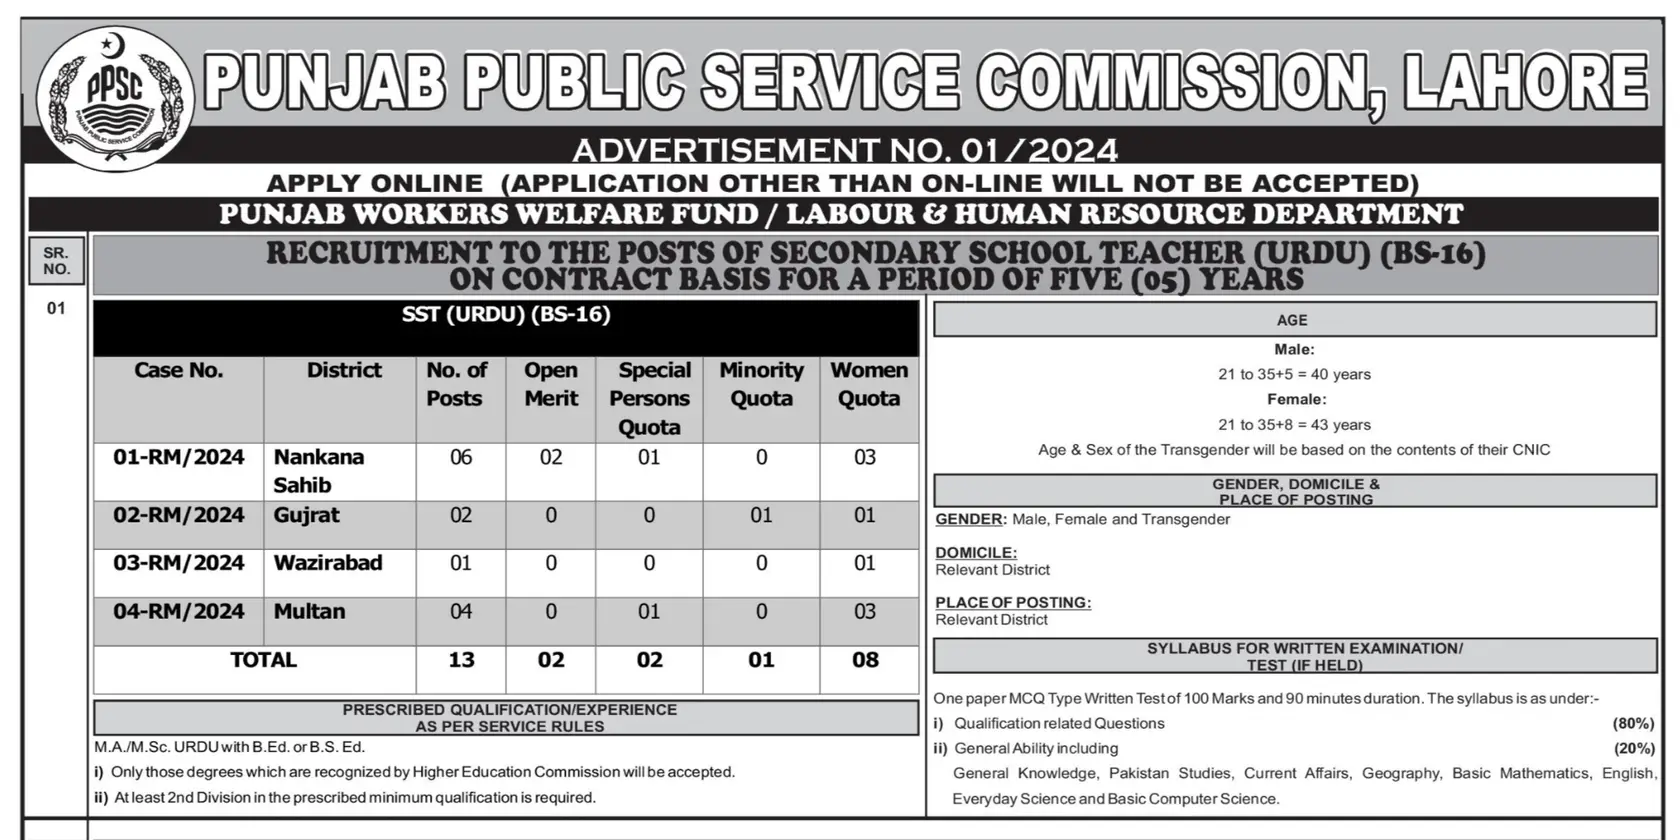 Ppsc Job Vacancies January Via Advertisement No For Subject Specialists Sst And Lecturers